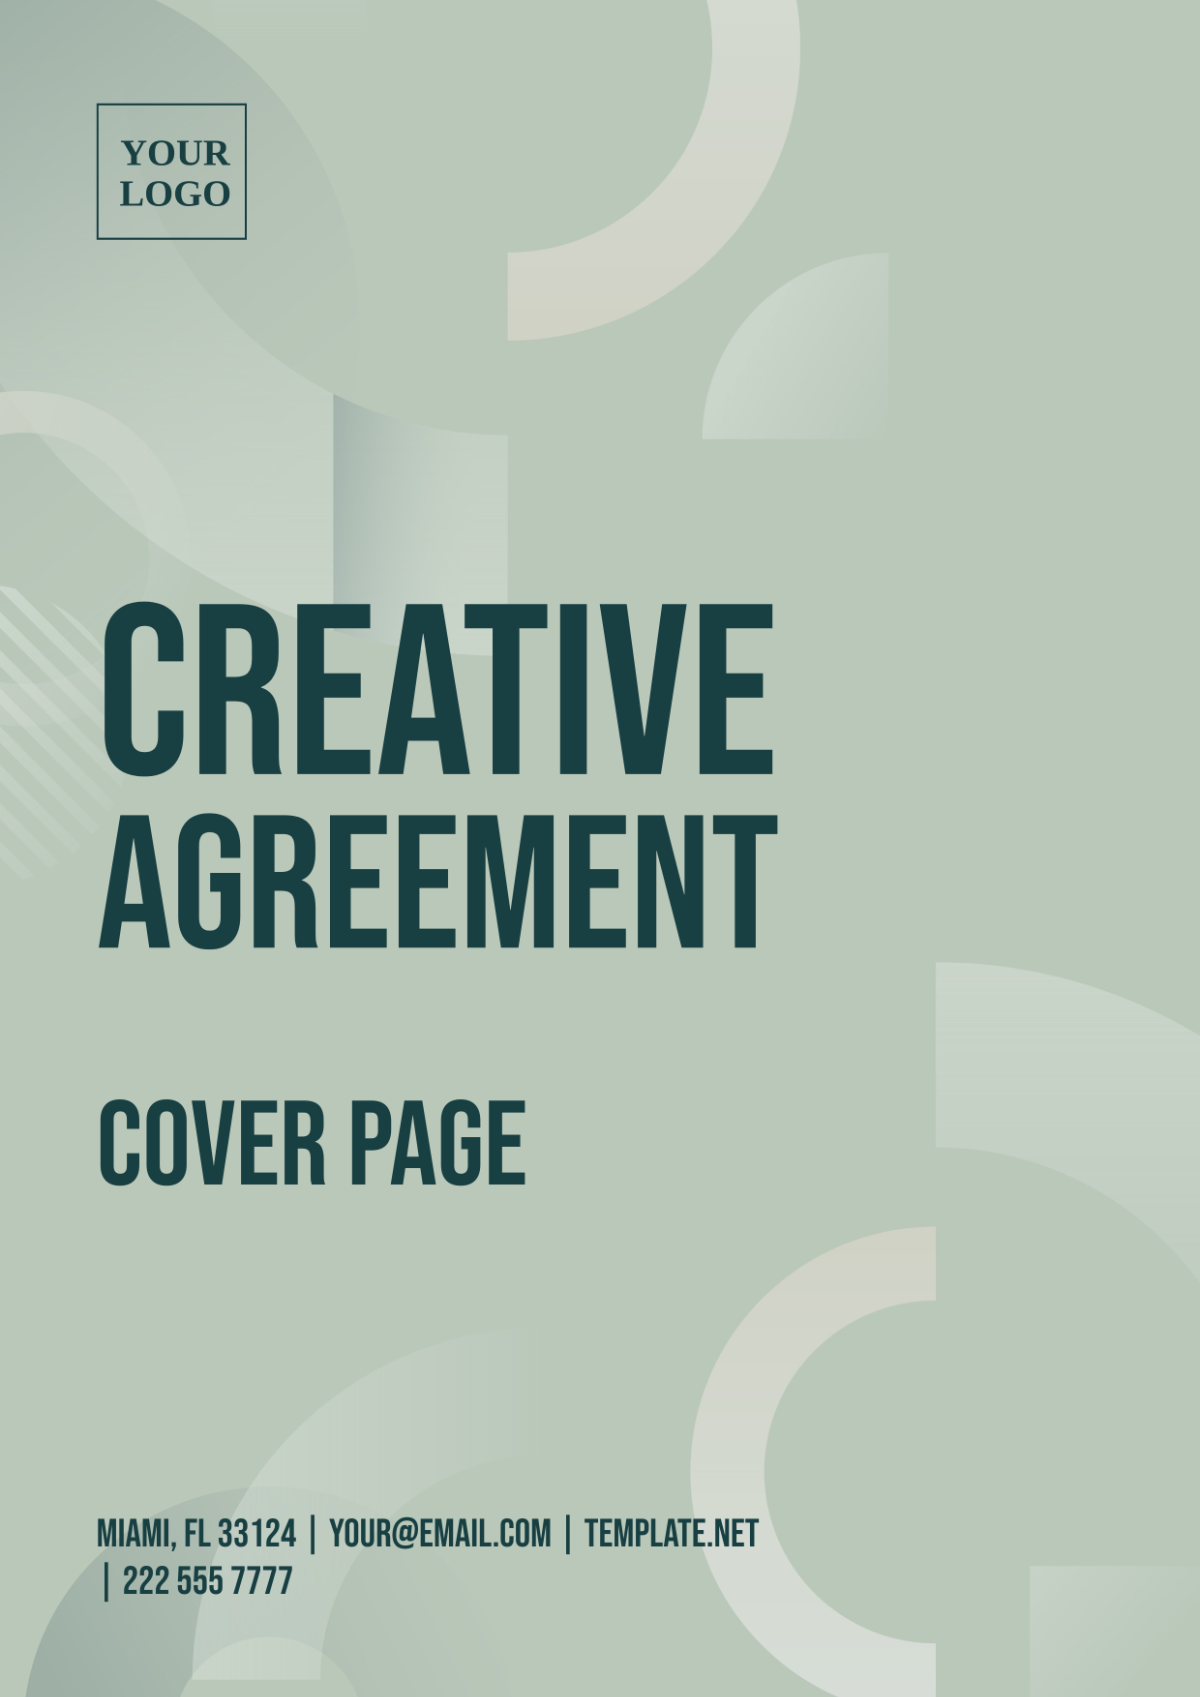 Creative Agreement Cover Page